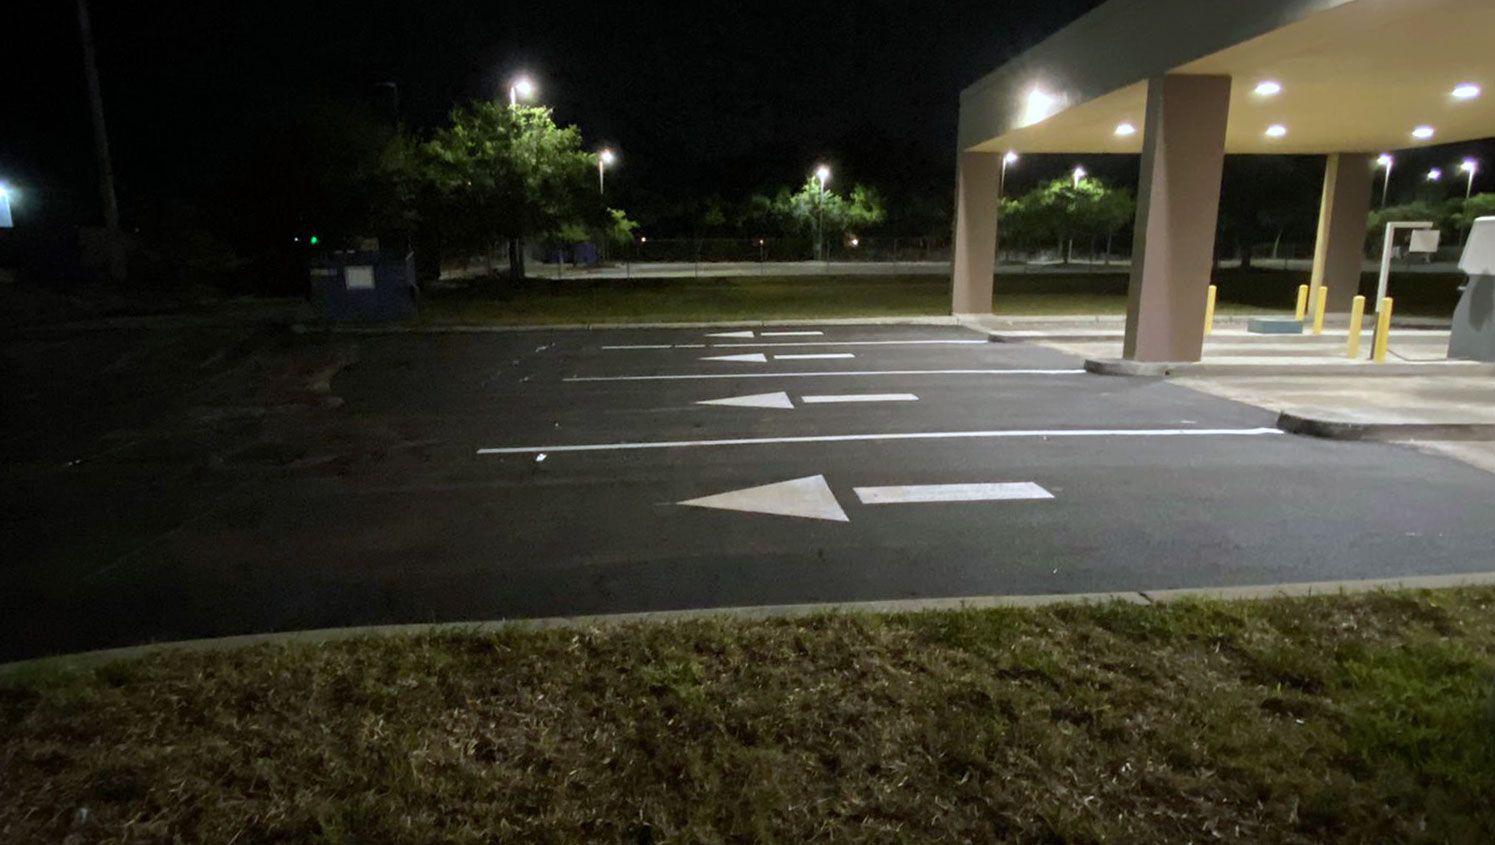 updated patron parking space line striping and curb safety paint at Wells Fargo in Tampa, FL